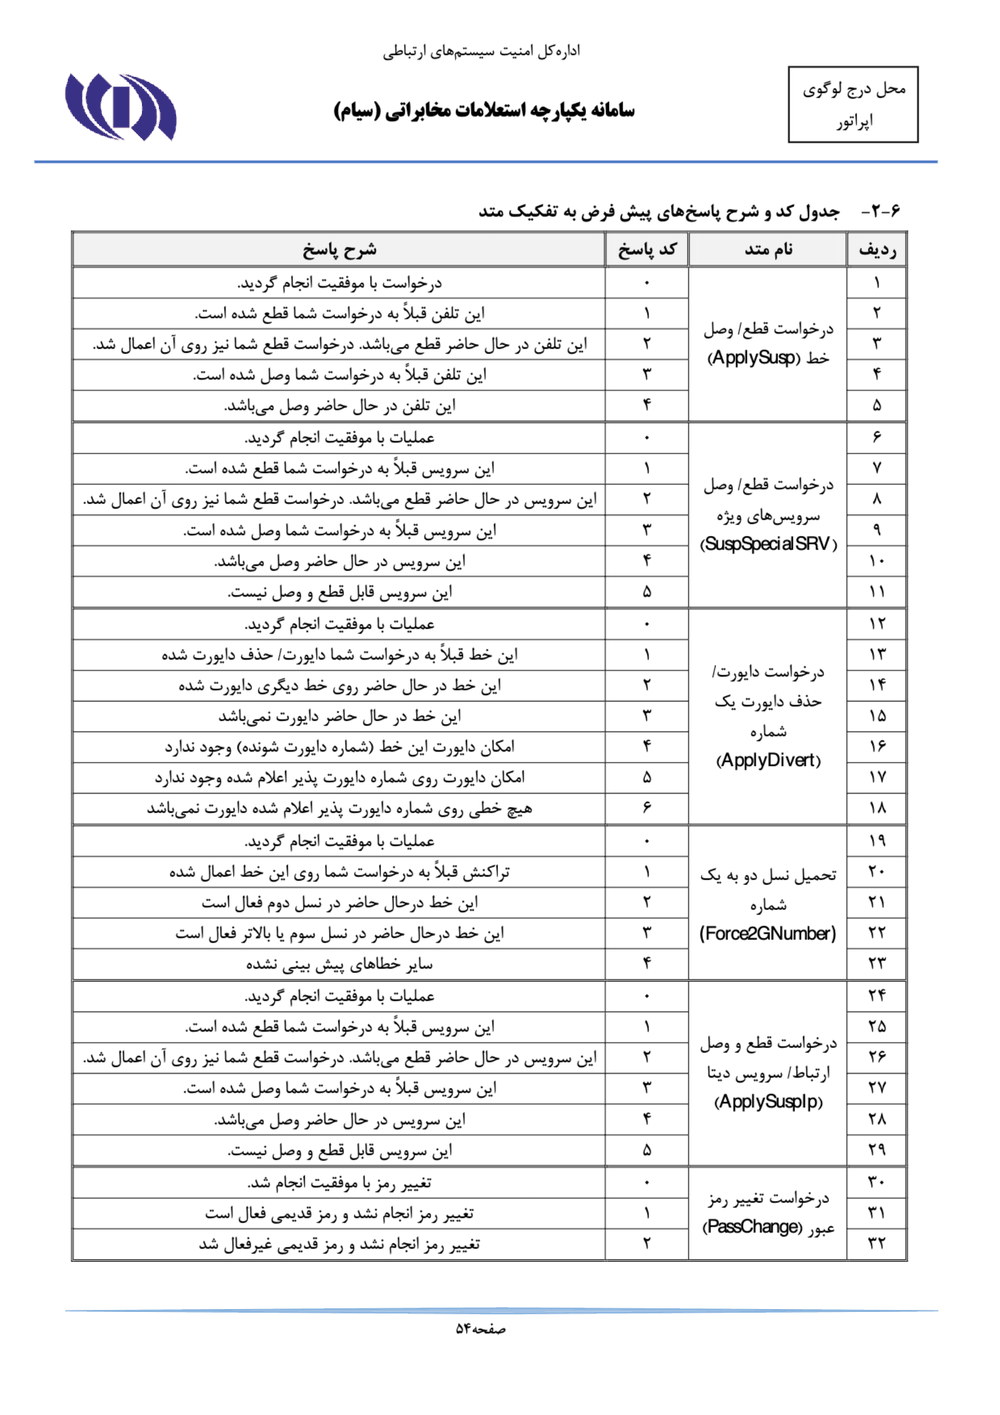 Page 54 from Iran’s SIAM Manual in Persian for Tracking and Controlling Mobile Phones